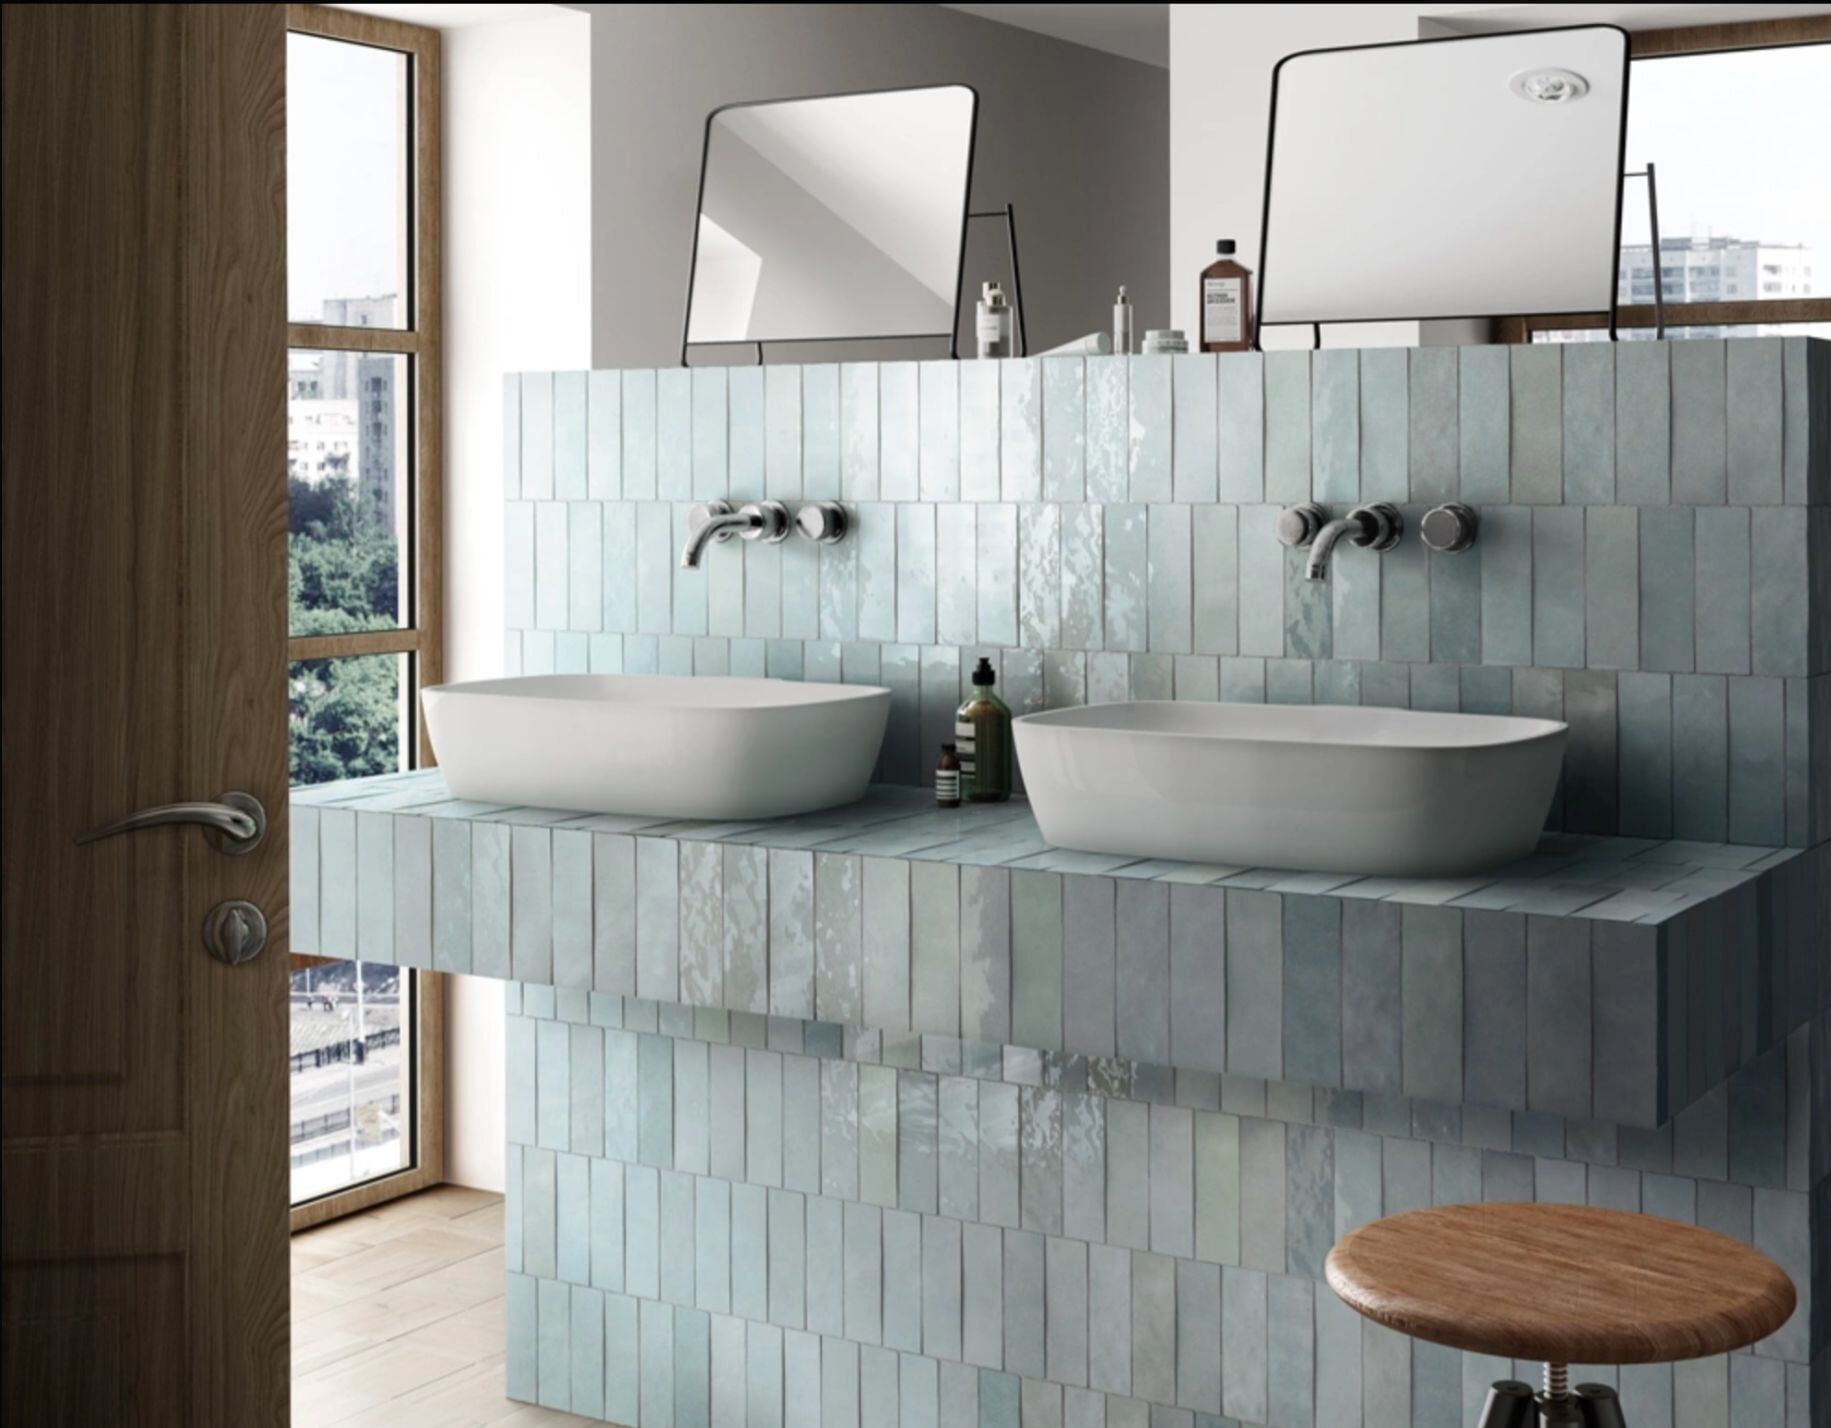 Green Bathroom Cabinetry Tiles — Tile Supplies in Alstonville in Alstonville, NSW